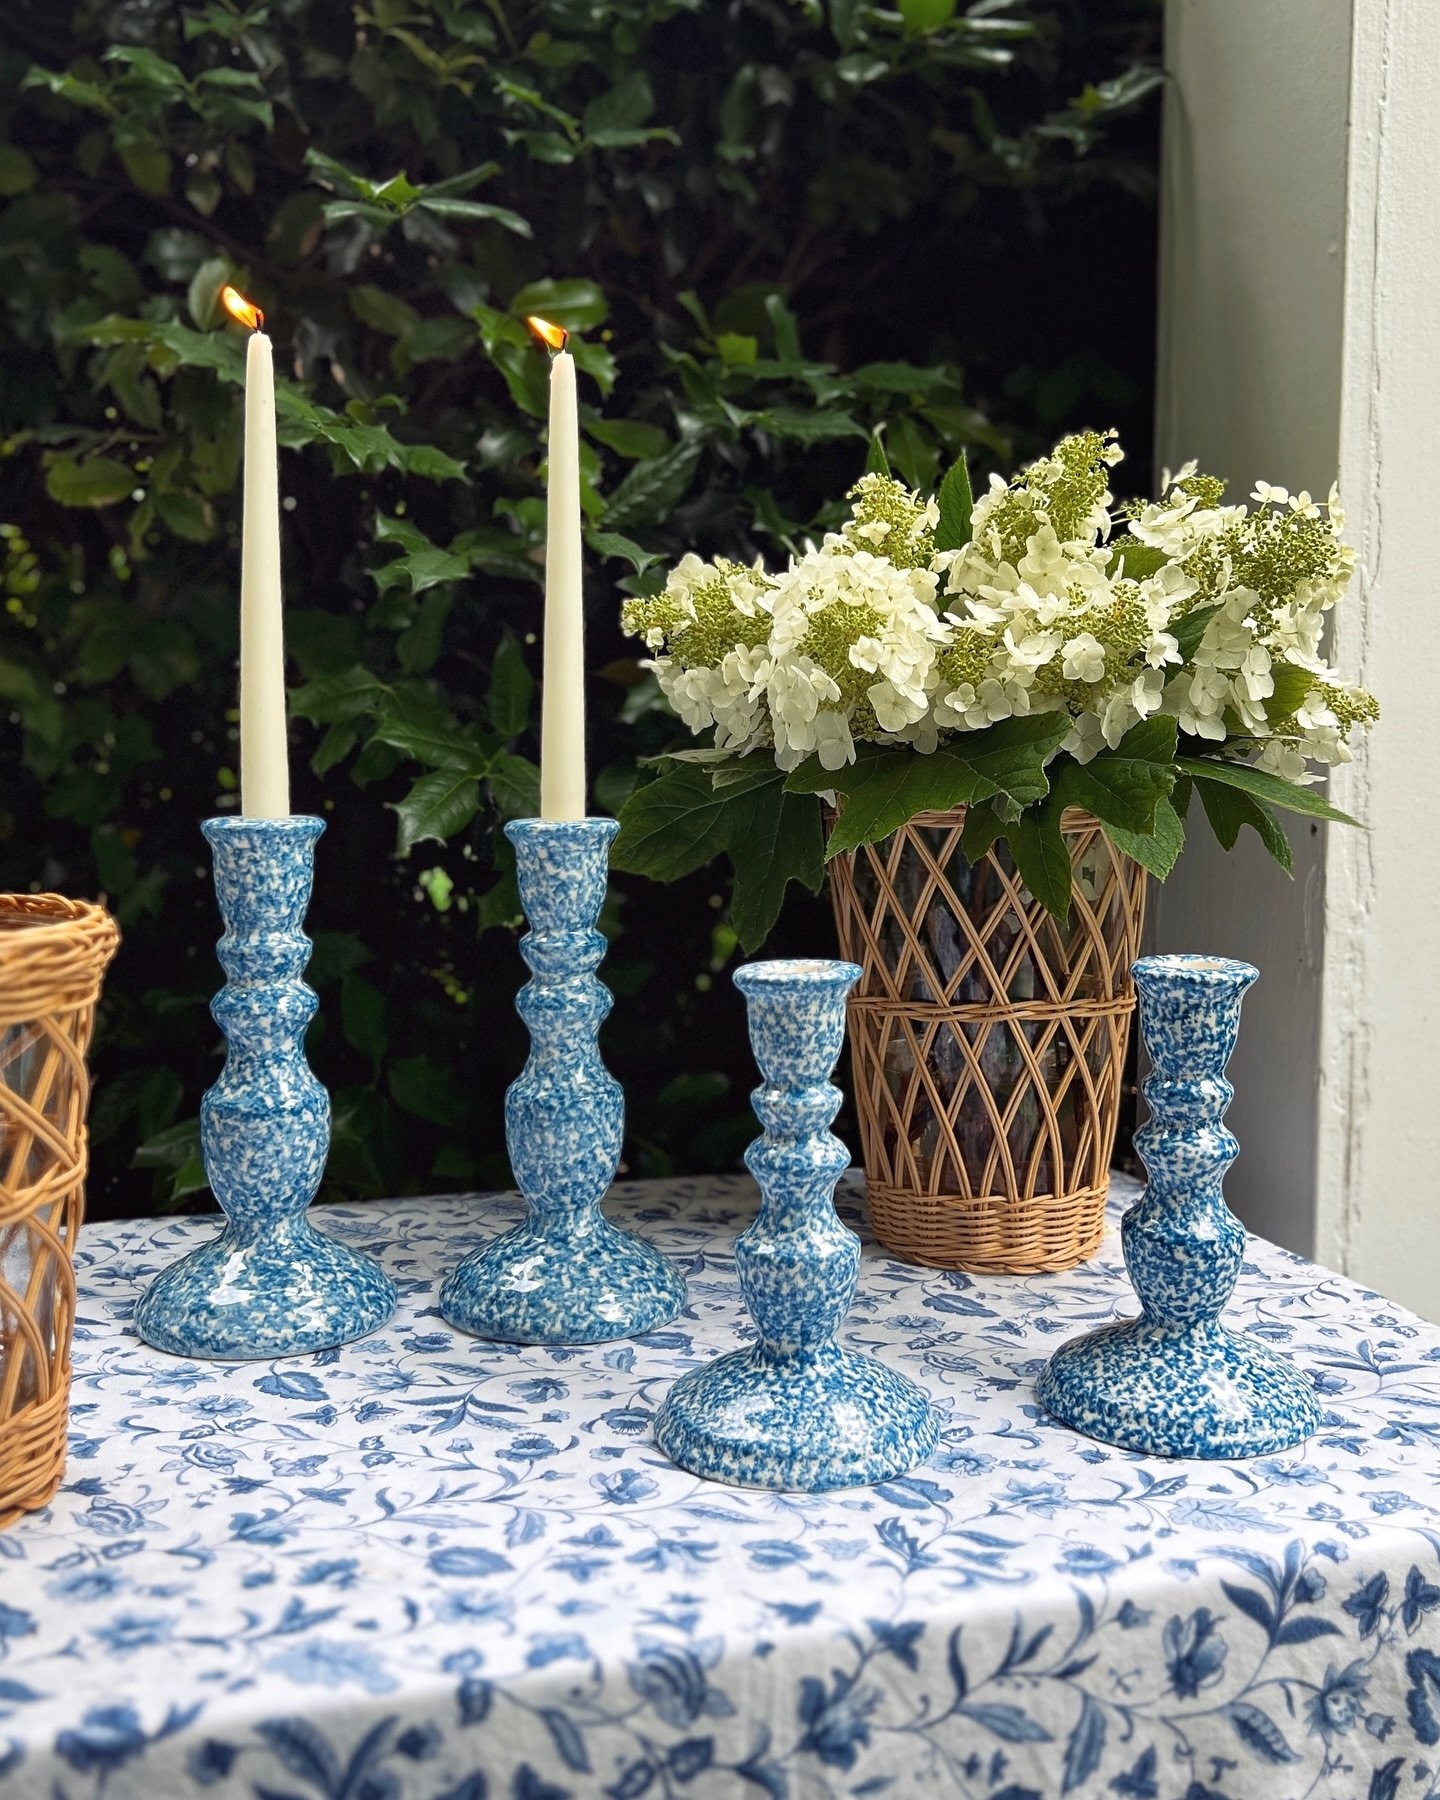 Deep greens and blues are the colors I choose 💙🤍💚 Two pairs of spongeware candlesticks are now available on the website for al fresco entertaining this summer.